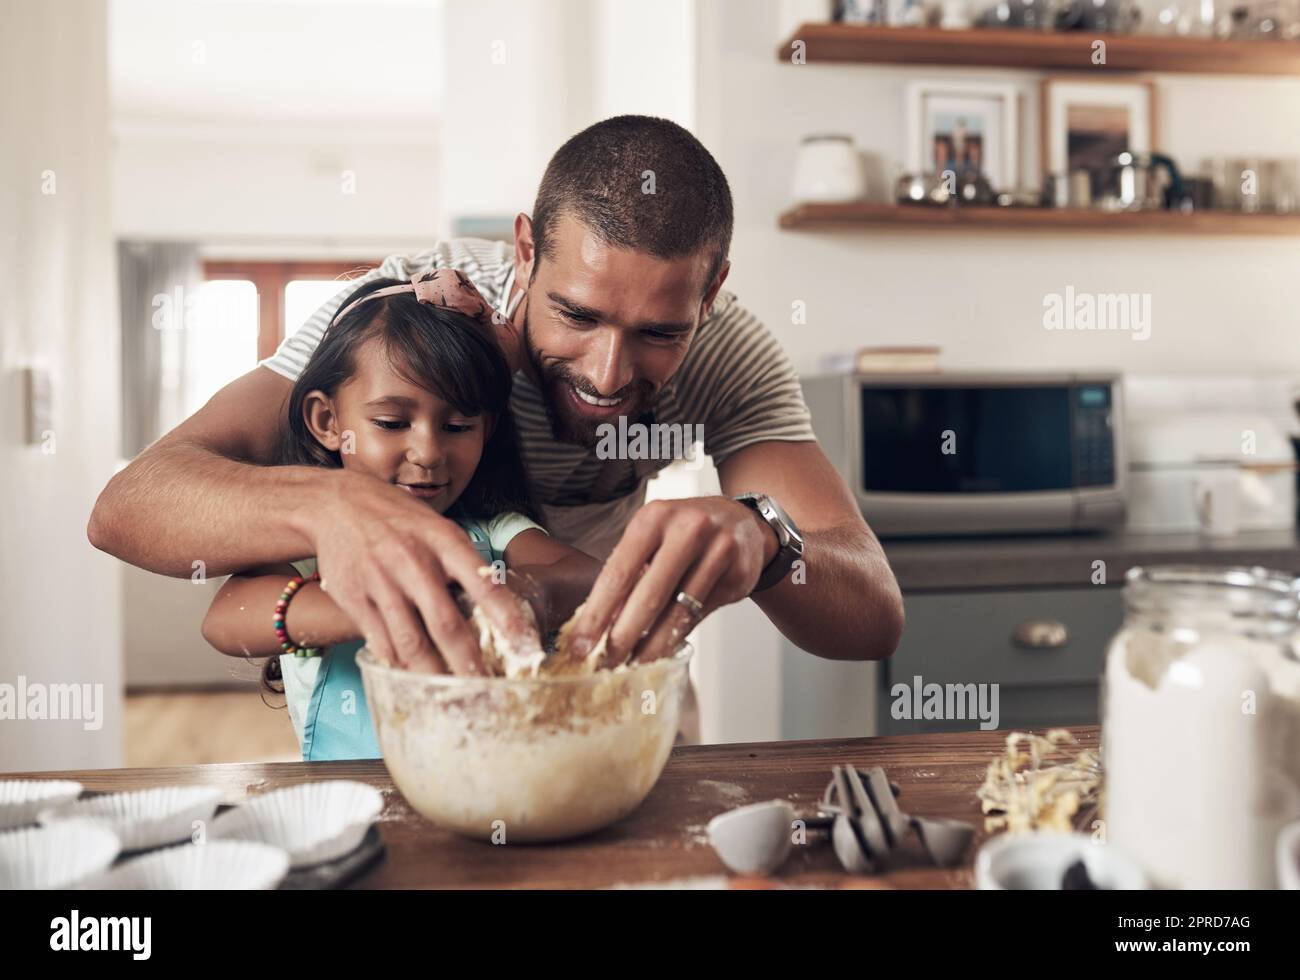 The world, wed discovered, doesnt love you like your family loves you. a father teaching his daughter how to bake in the kitchen at home. Stock Photo